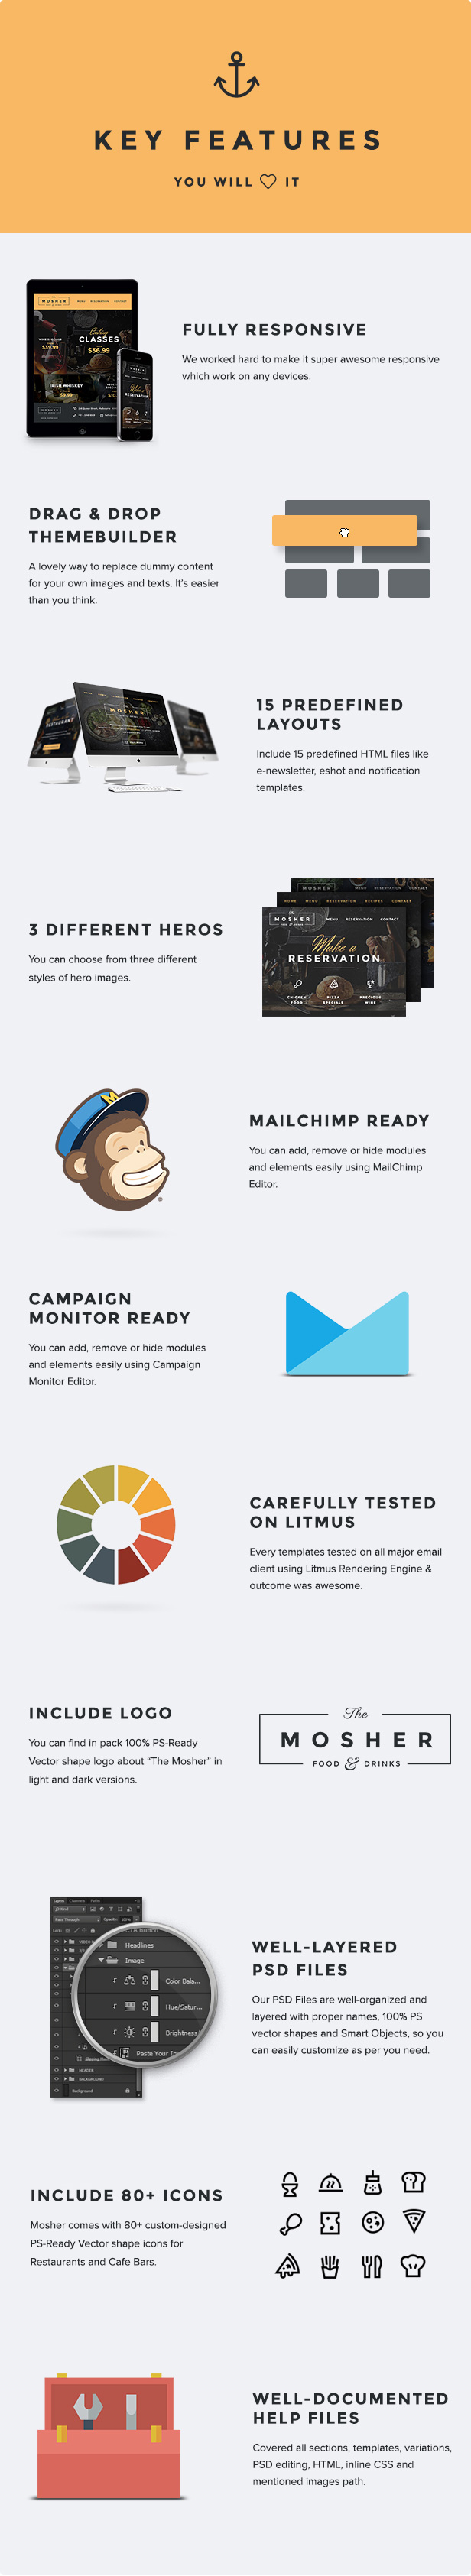 Mosher - Promotional Email Pack